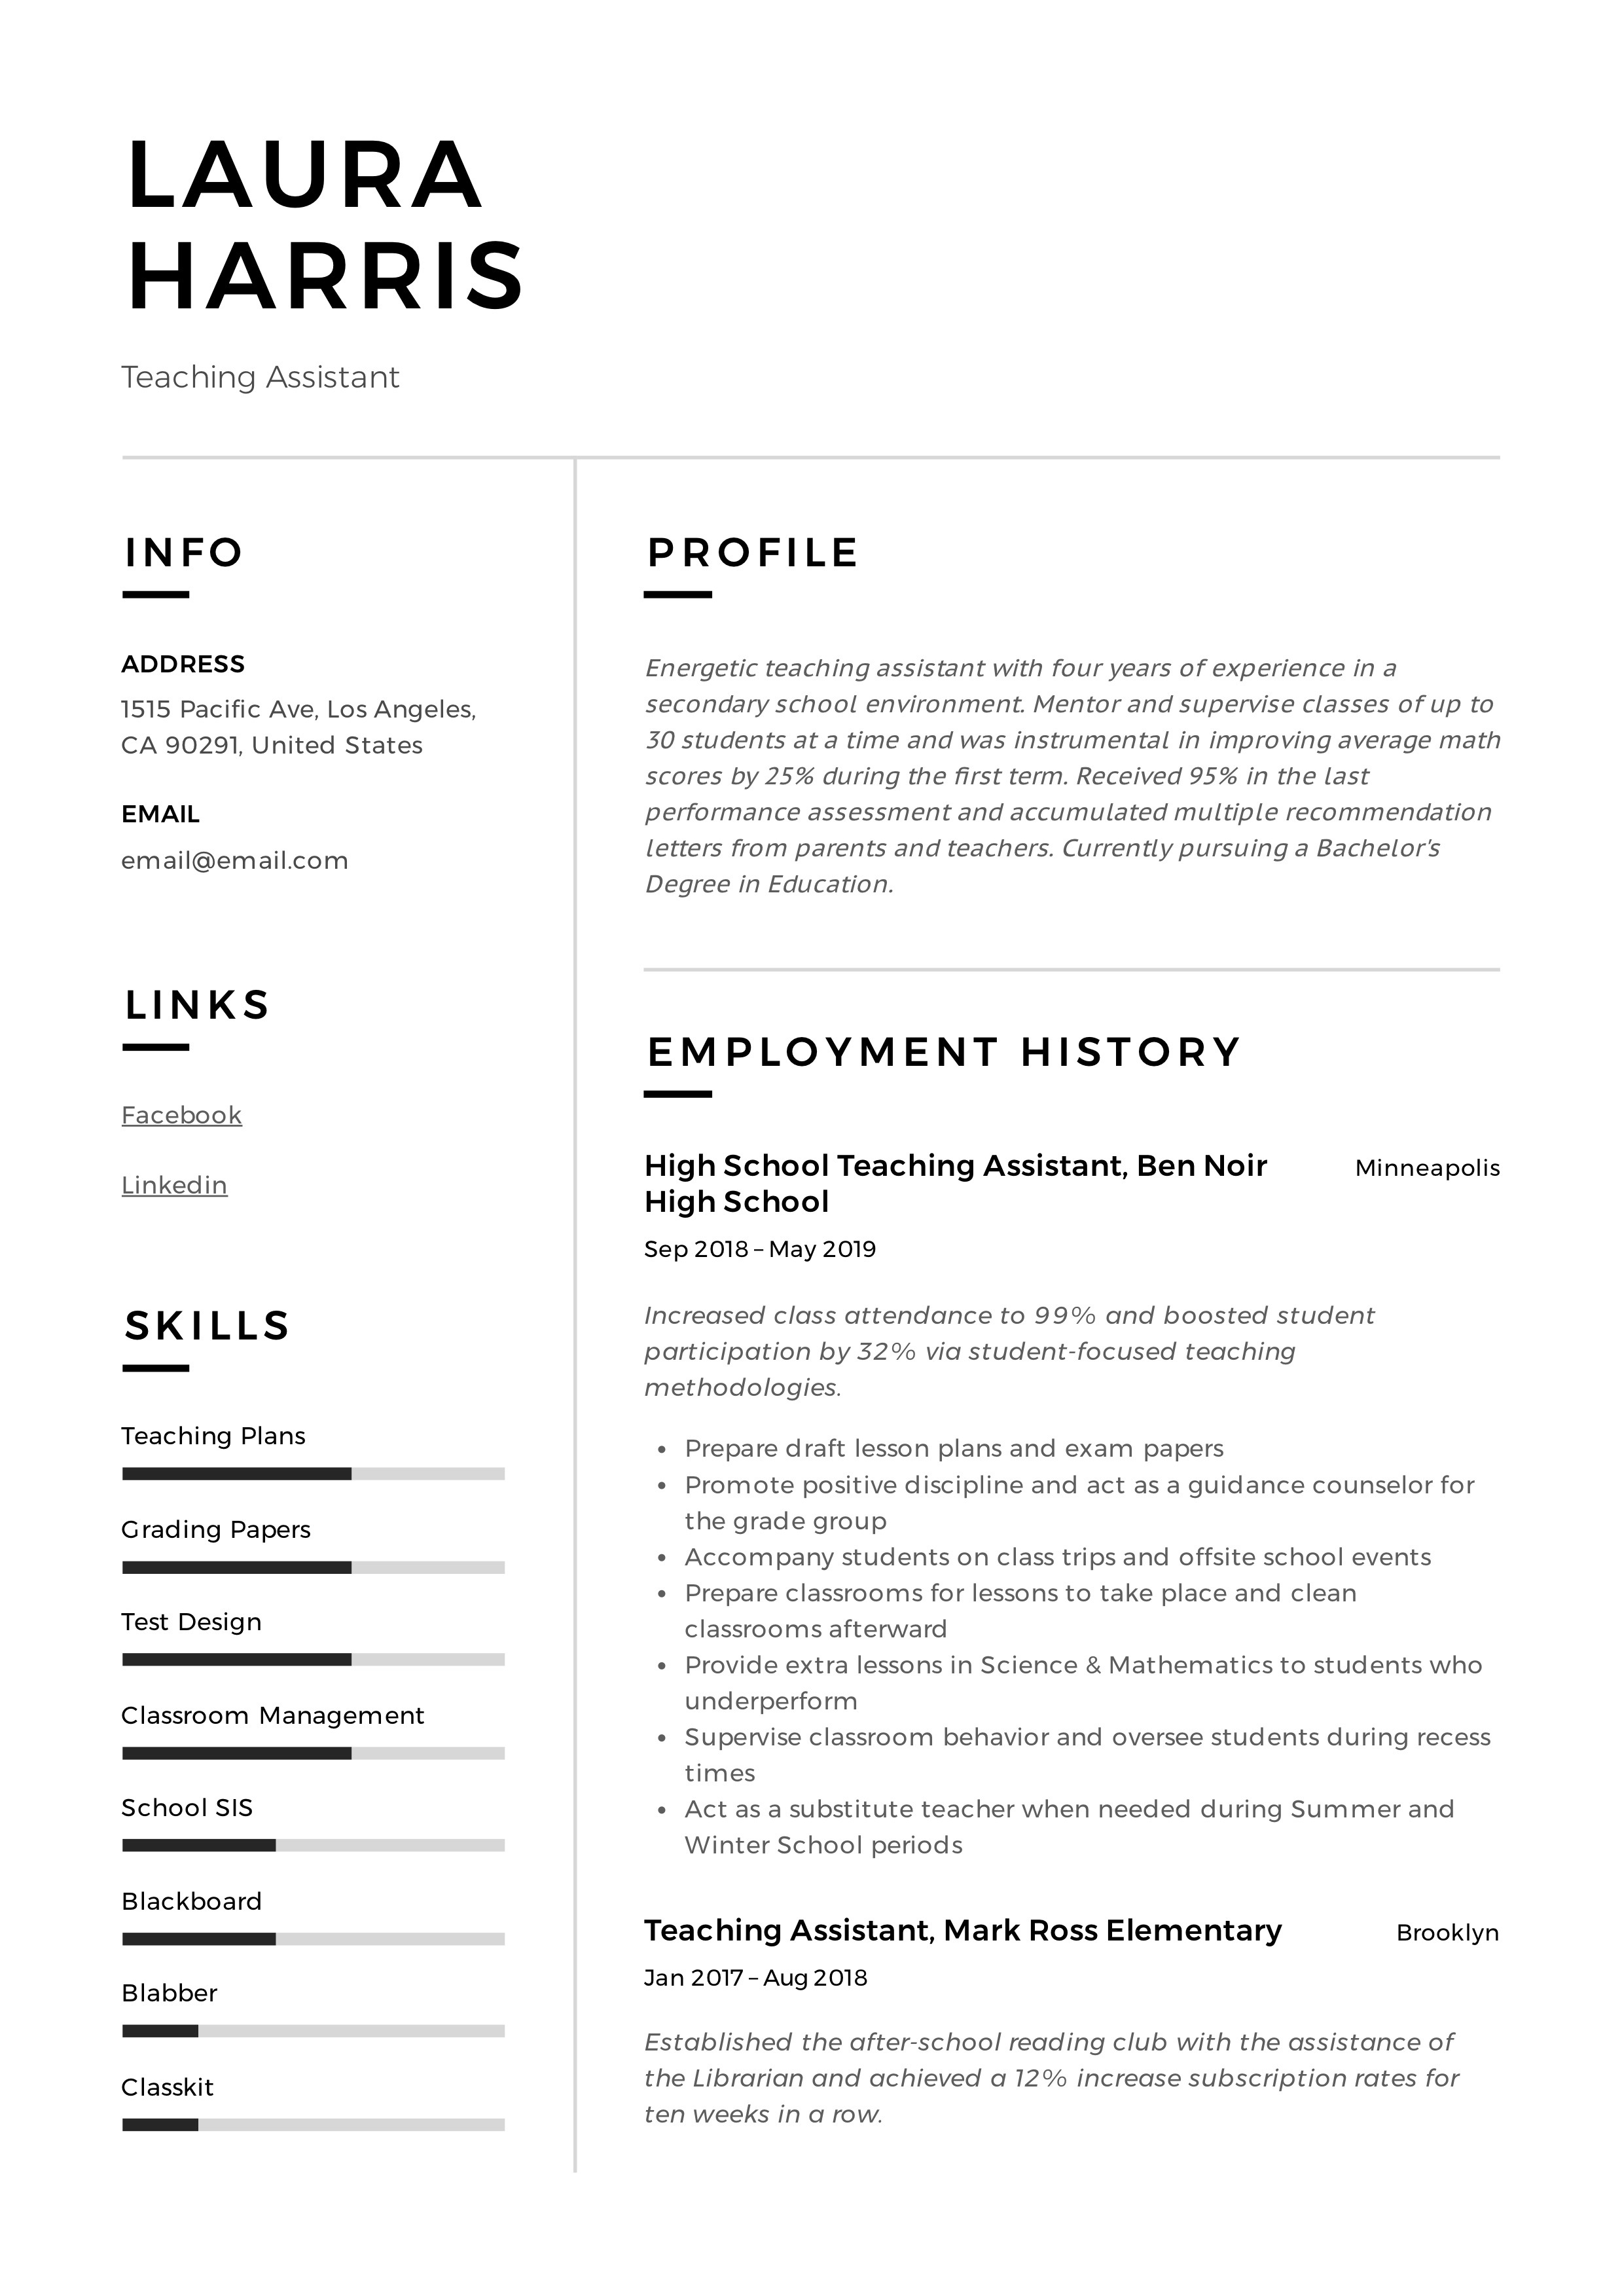 Teaching Assistant Resume Example pdf